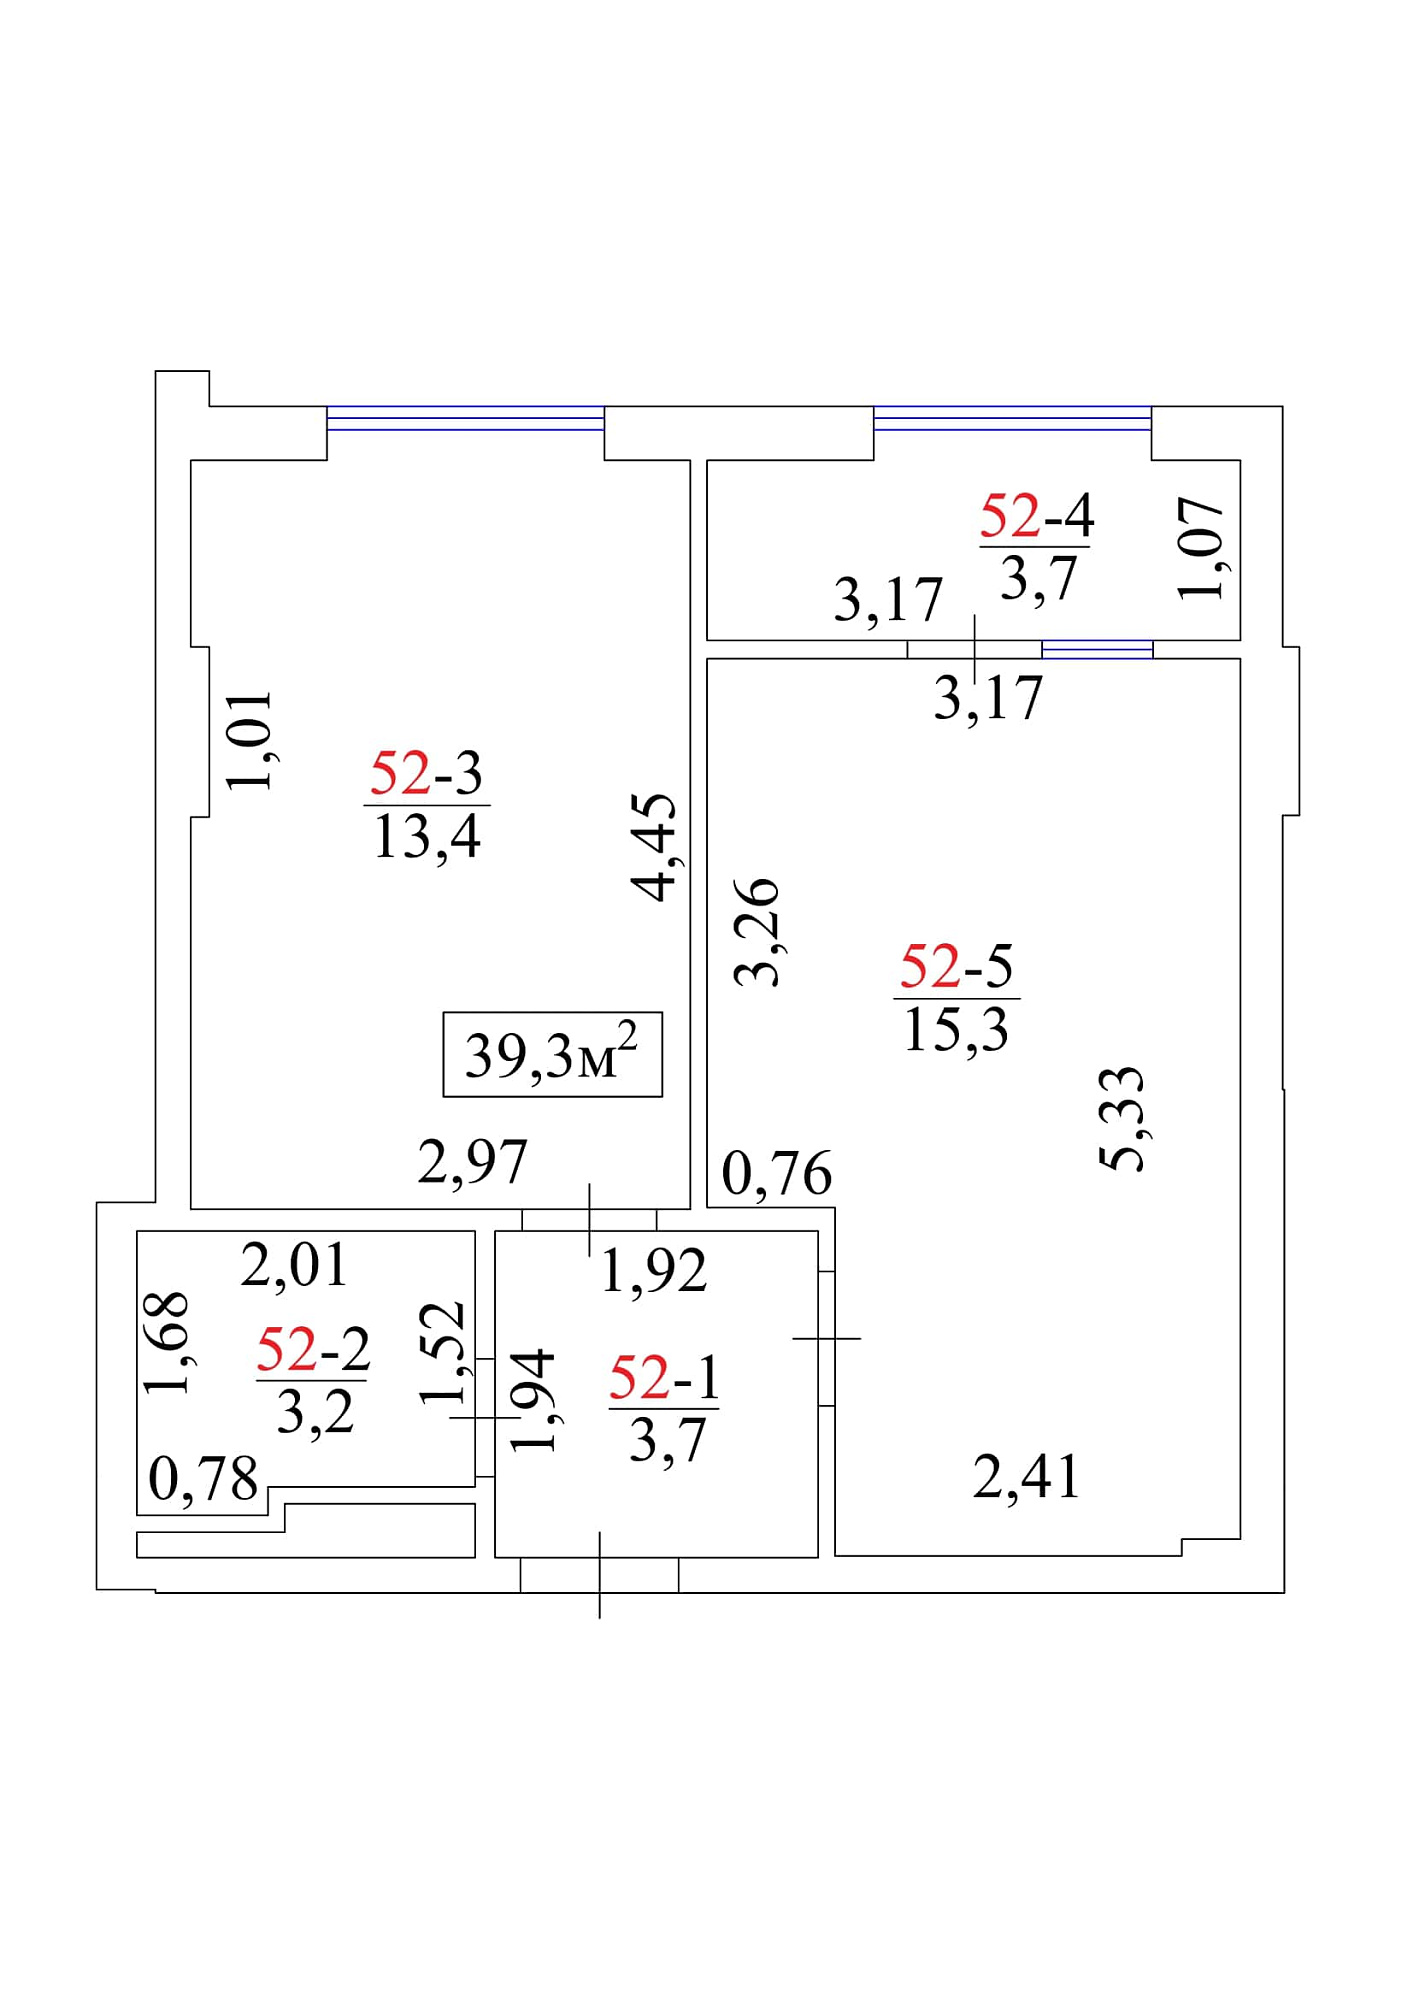 Planning 1-rm flats area 39.3m2, AB-01-06/00050.